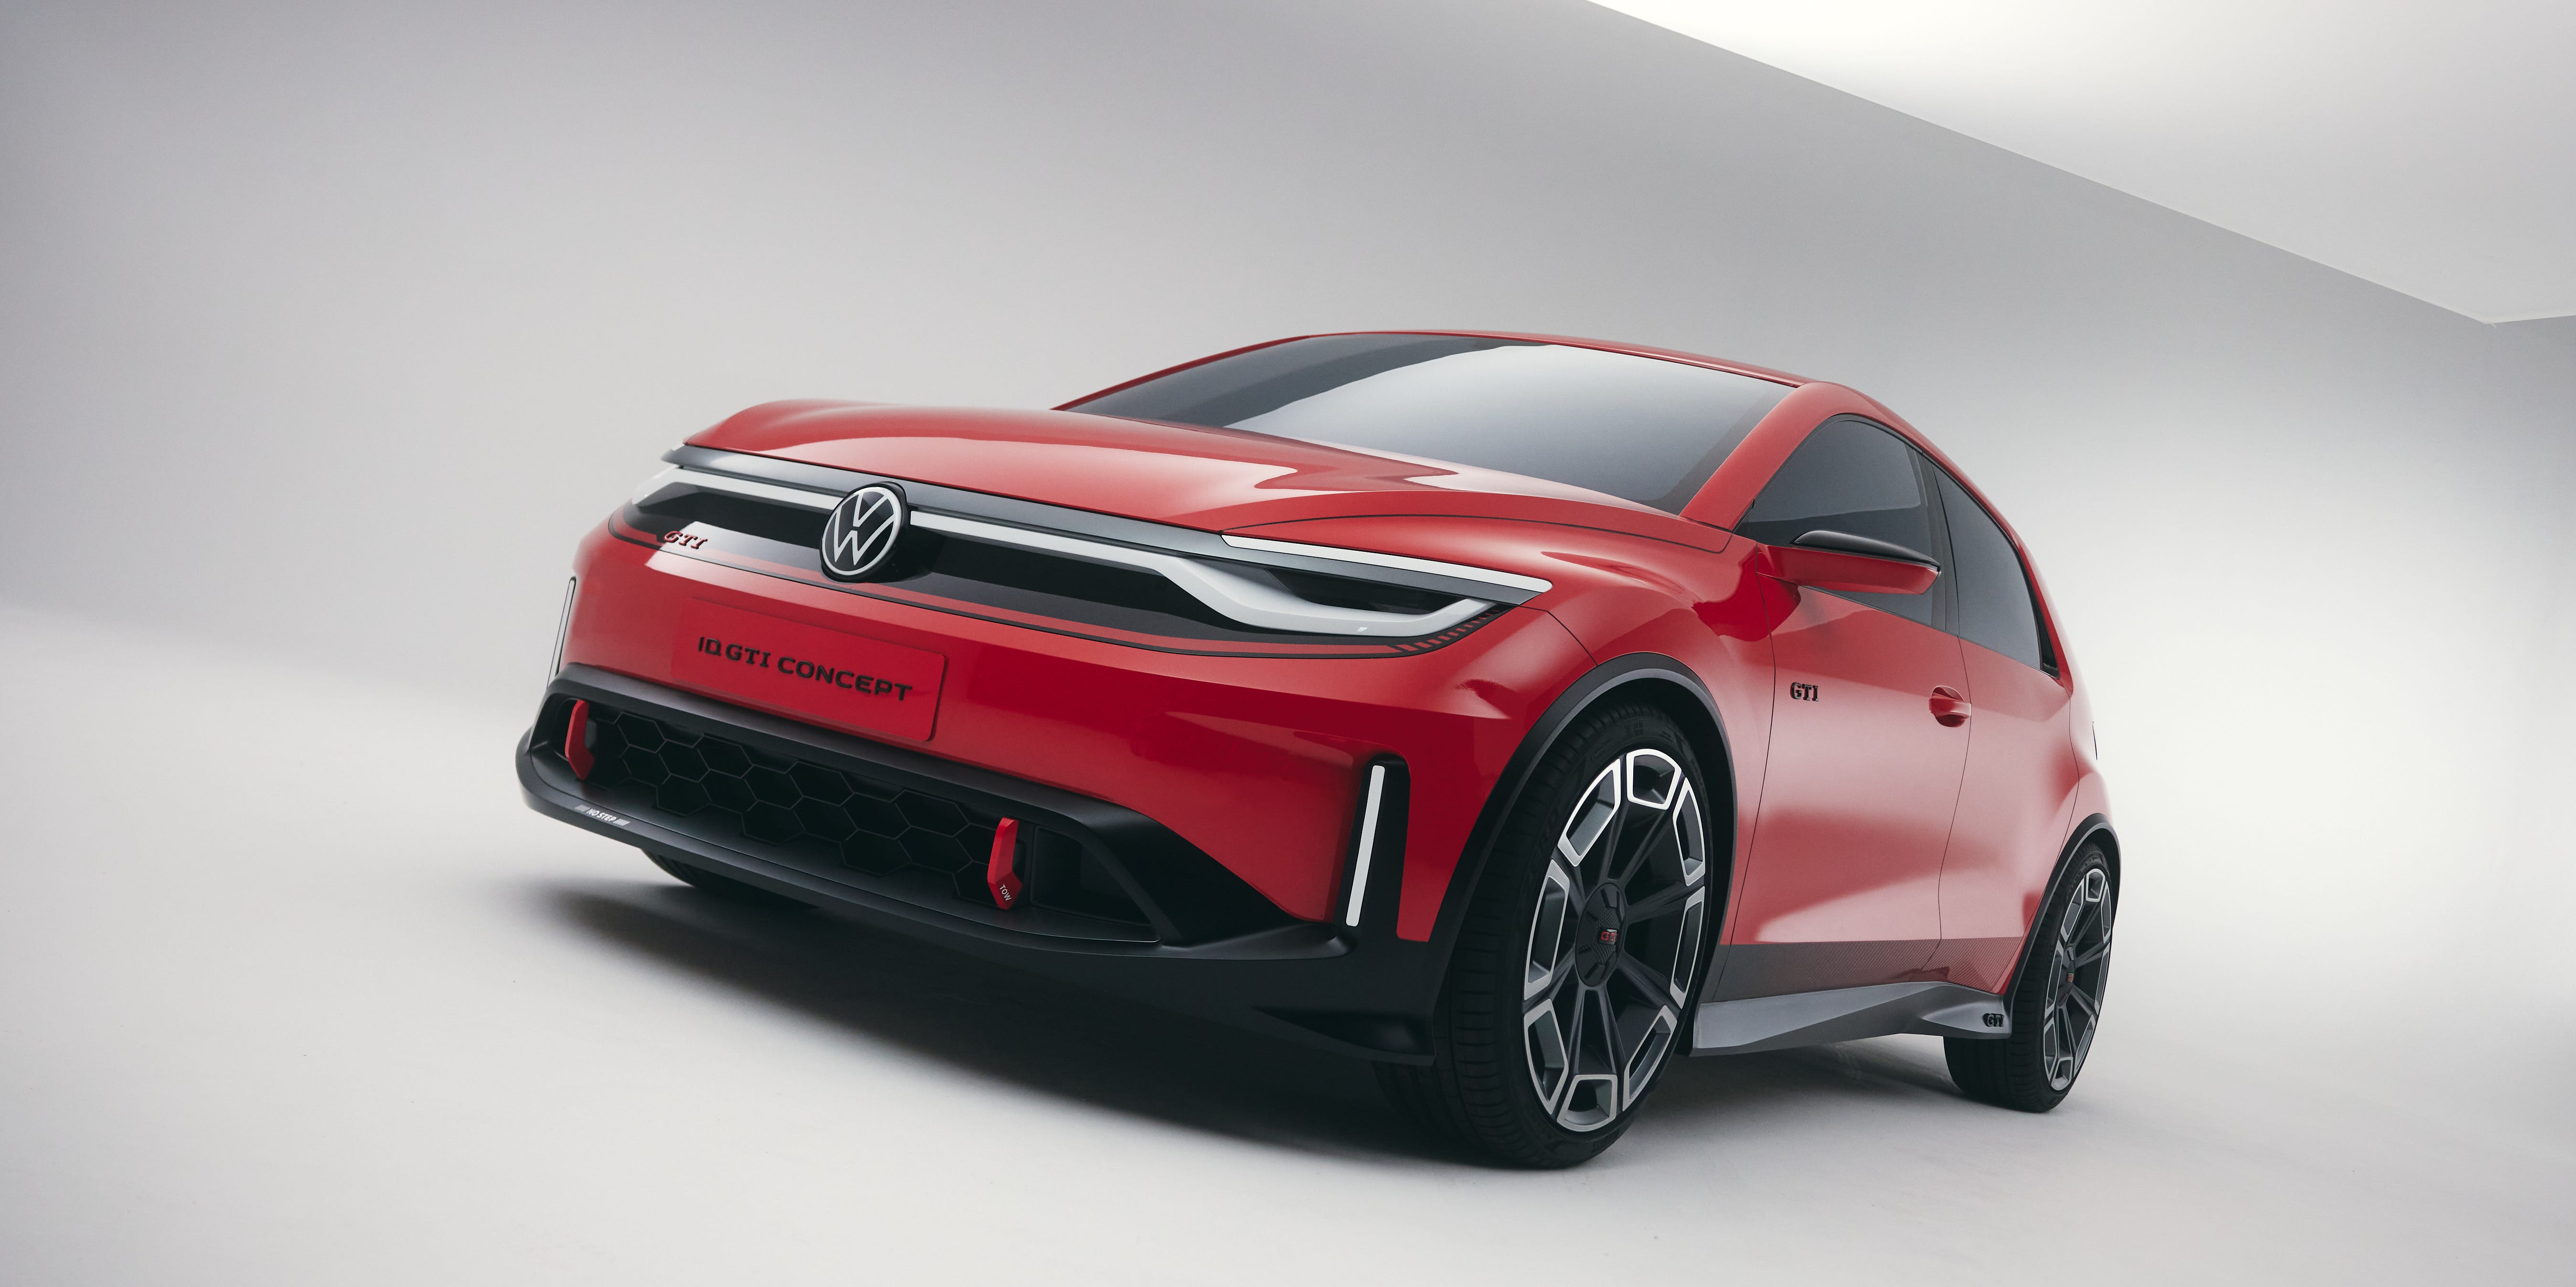 The Volkswagen ID. GTI Concept Shows the Electric GTI of the Future